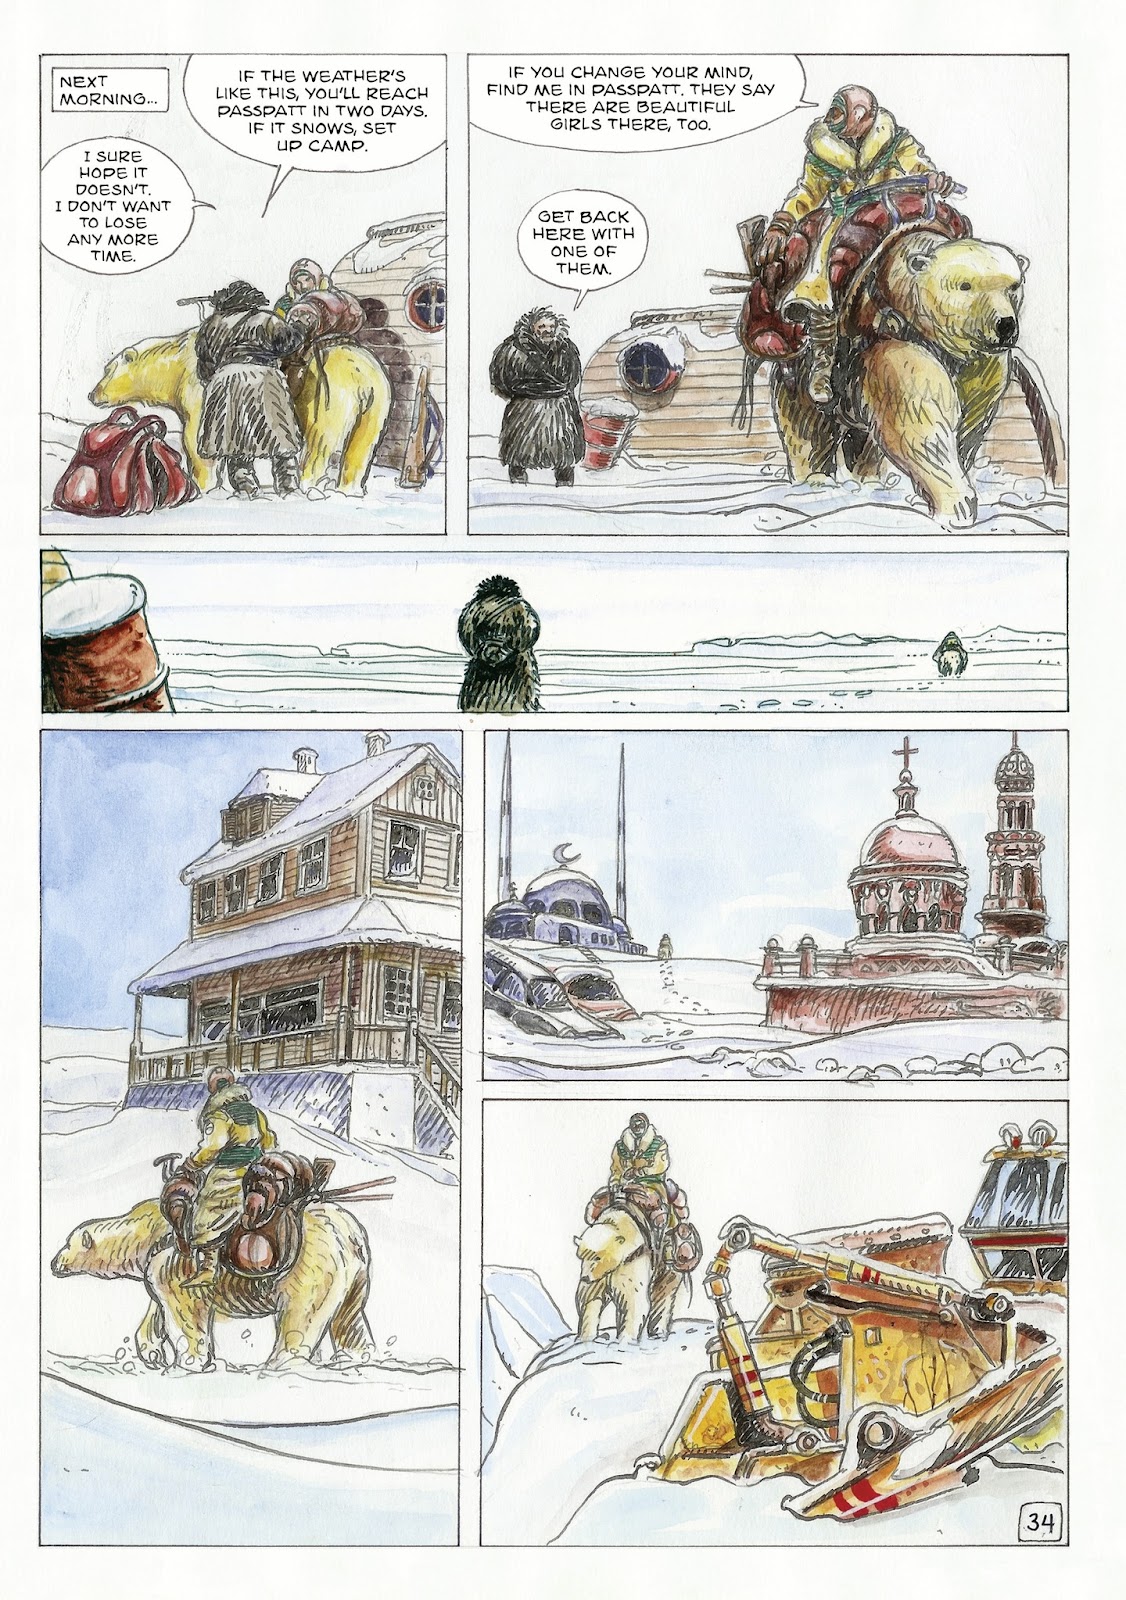 The Man With the Bear issue 1 - Page 36